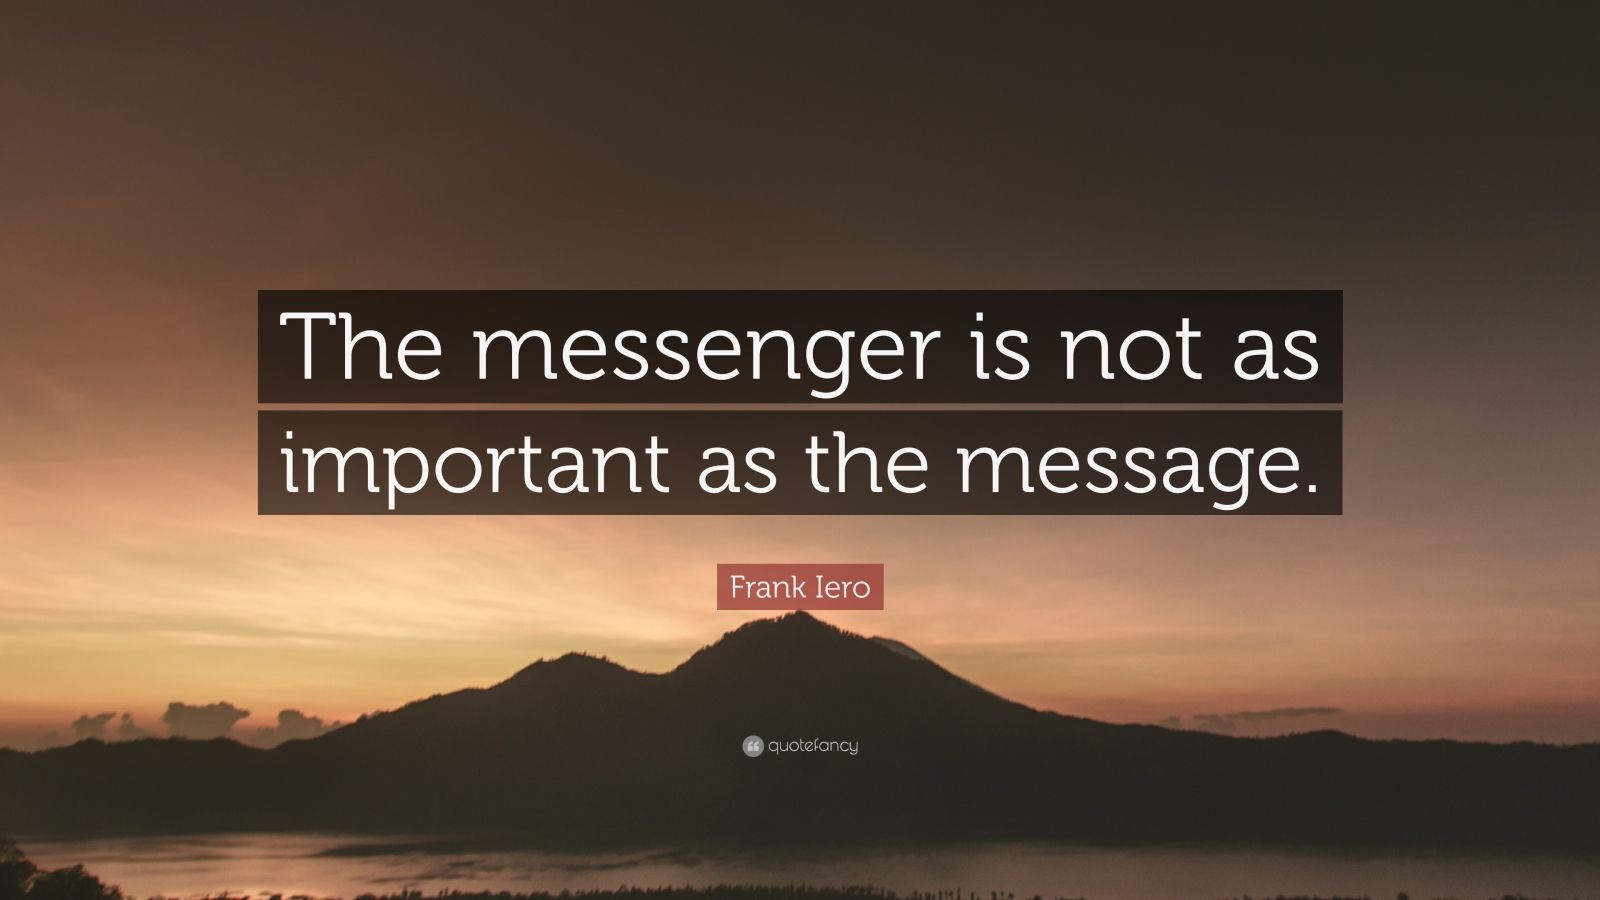 Frank Iero Quote: “The messenger is not as important as the message